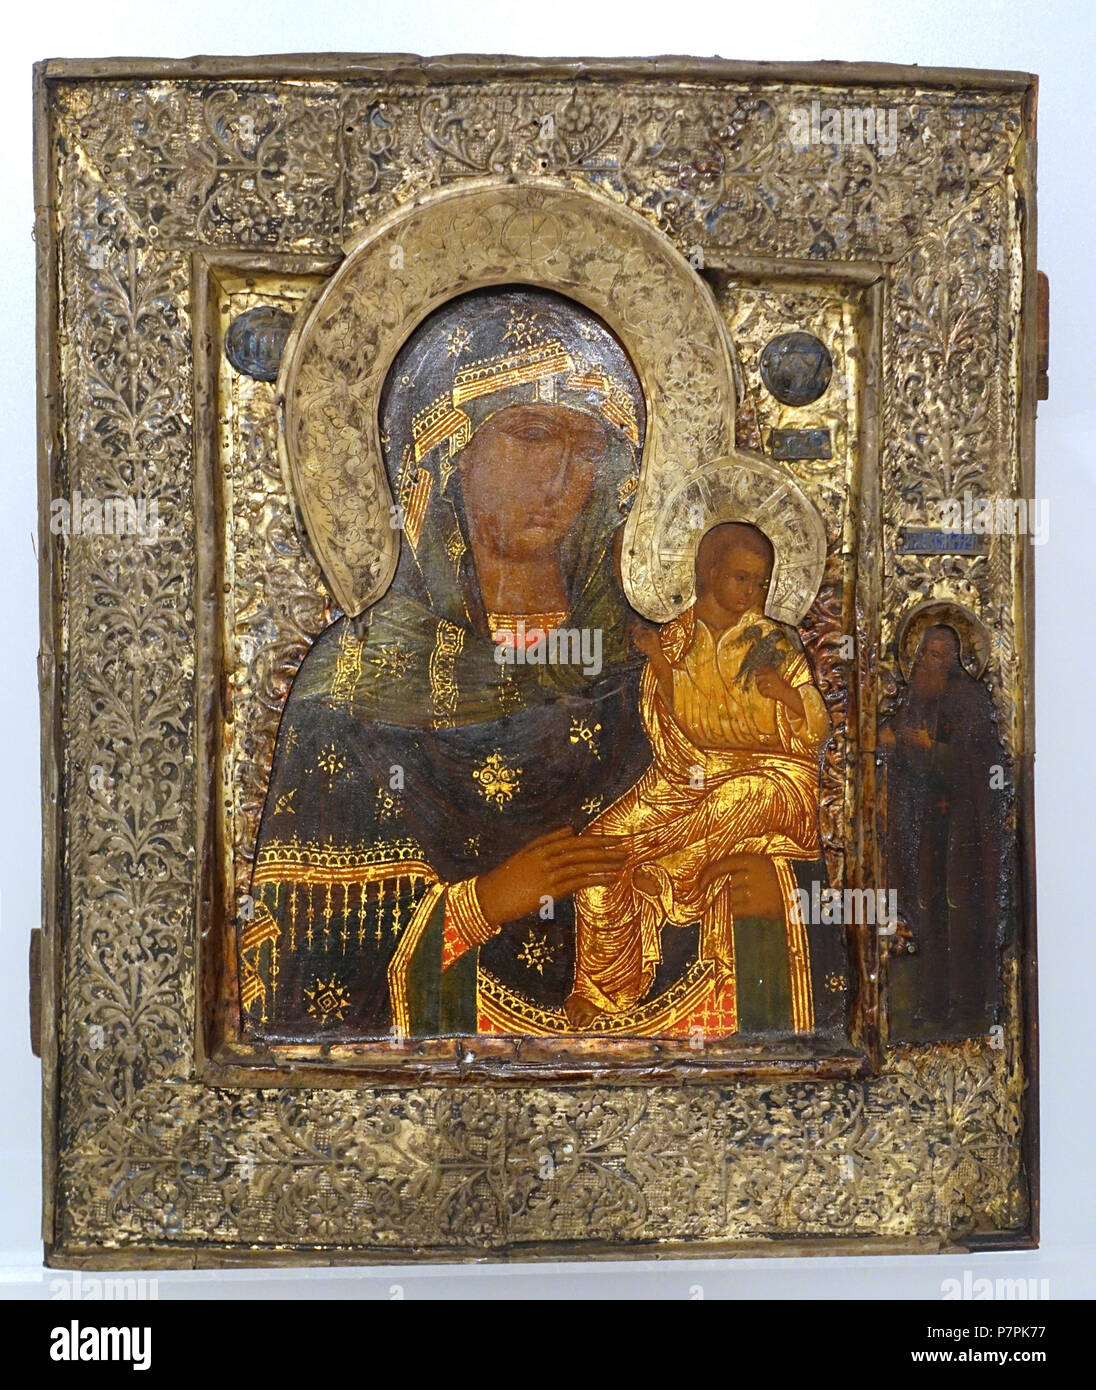 English: Exhibit in the Fogg Art Museum, Harvard University, Cambridge, Massachusetts, USA. This artwork is in the  because the artist died more than 70 years ago. 11 April 2015, 12:37:07 254 Madonna and Child Holding Dove, Russia, artist unknown, late 1500s AD, tempera on panel - Fogg Art Museum, Harvard University - DSC01448 Stock Photo